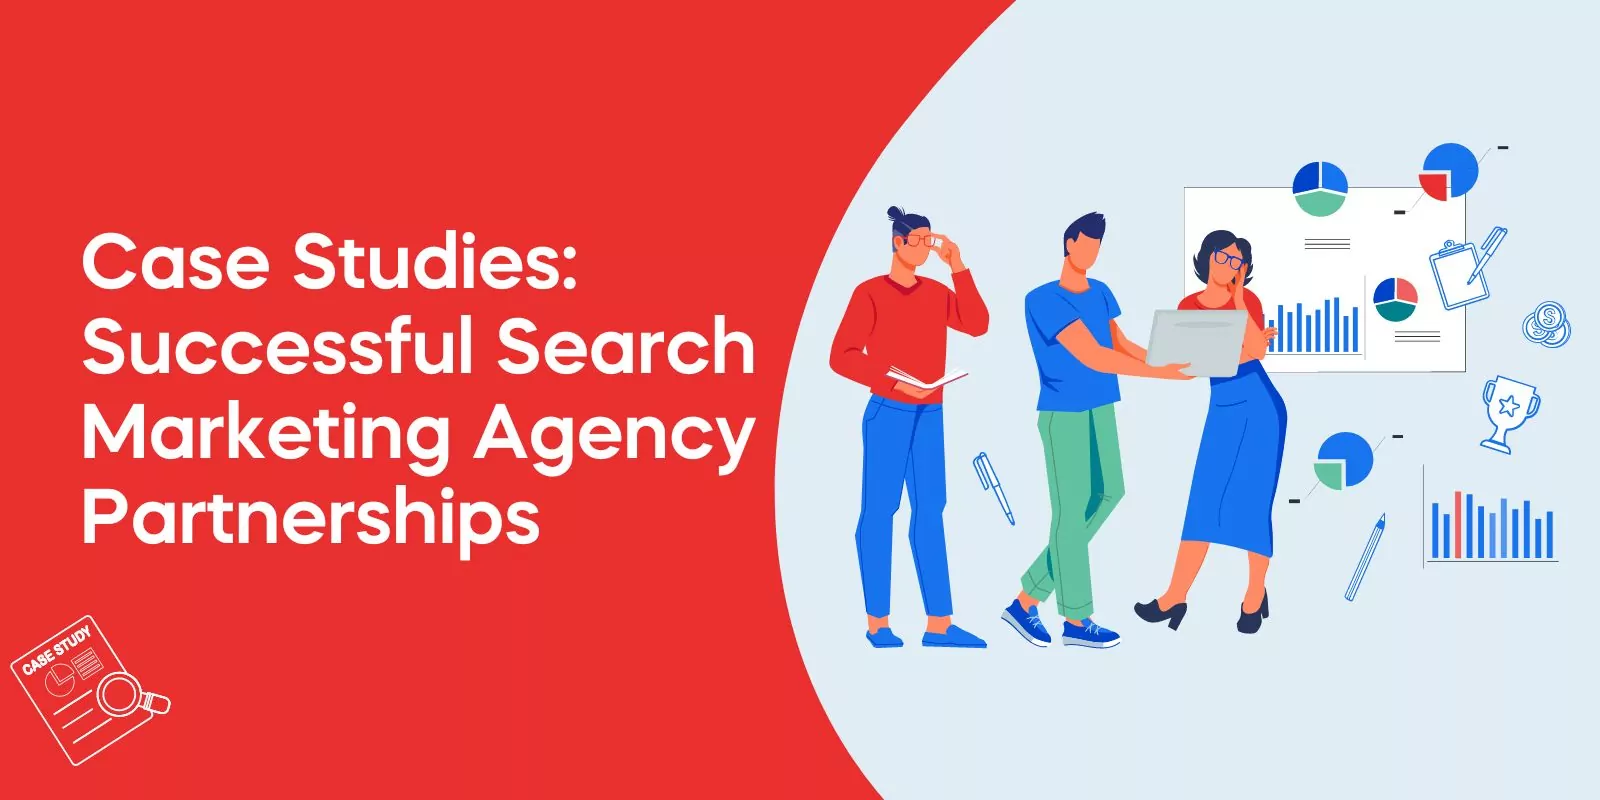 Case Studies: Successful Search Marketing Agency Partnerships